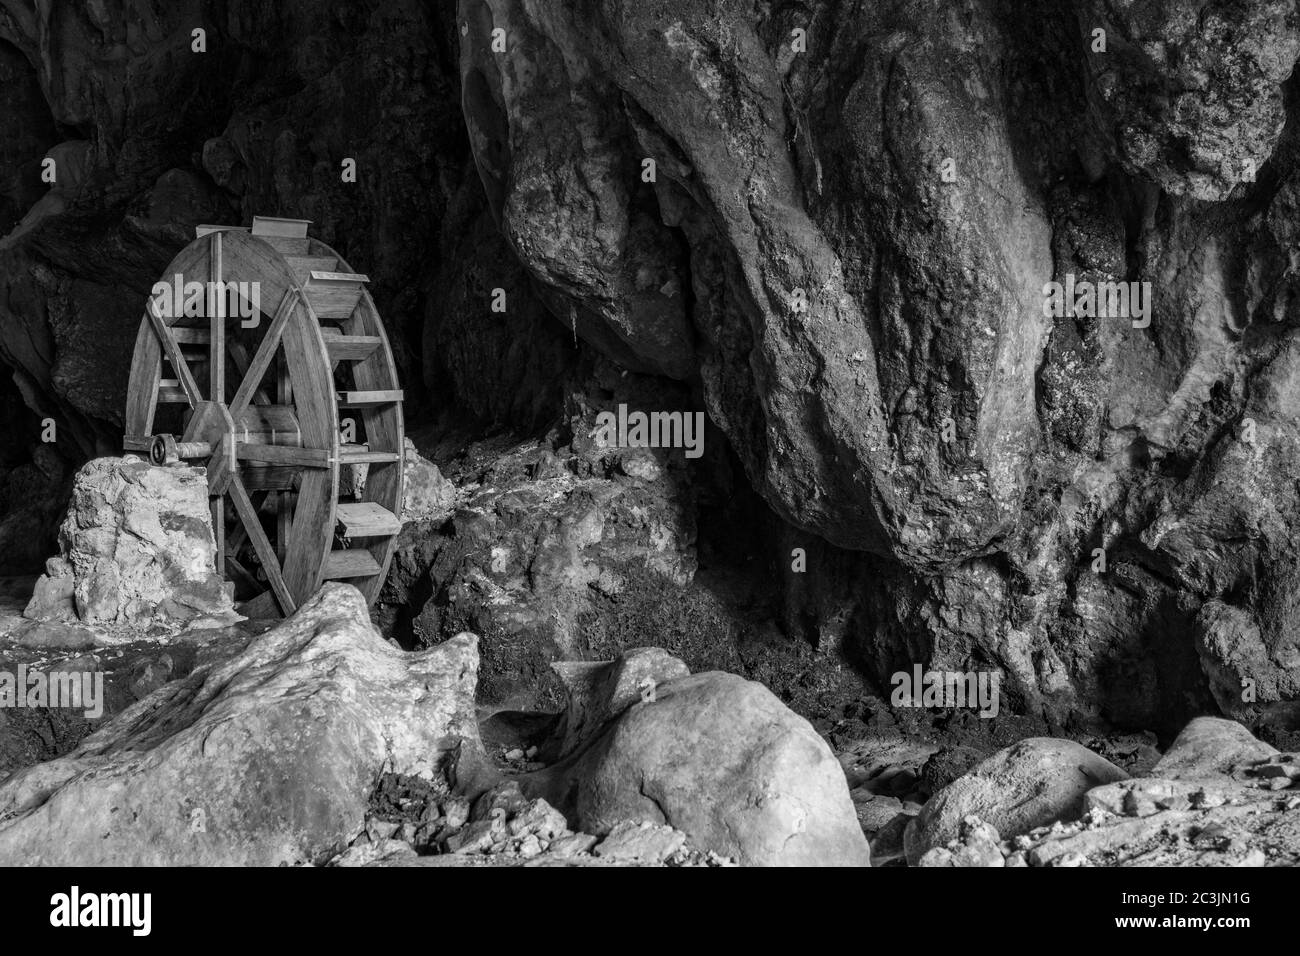 October 6, 2019 - Bellegra, Rome, Lazio, Italy - The karst caves, called 'Grotte dell'Arco' (Caves of the Arc). The wheel of an old mill, now in disus Stock Photo